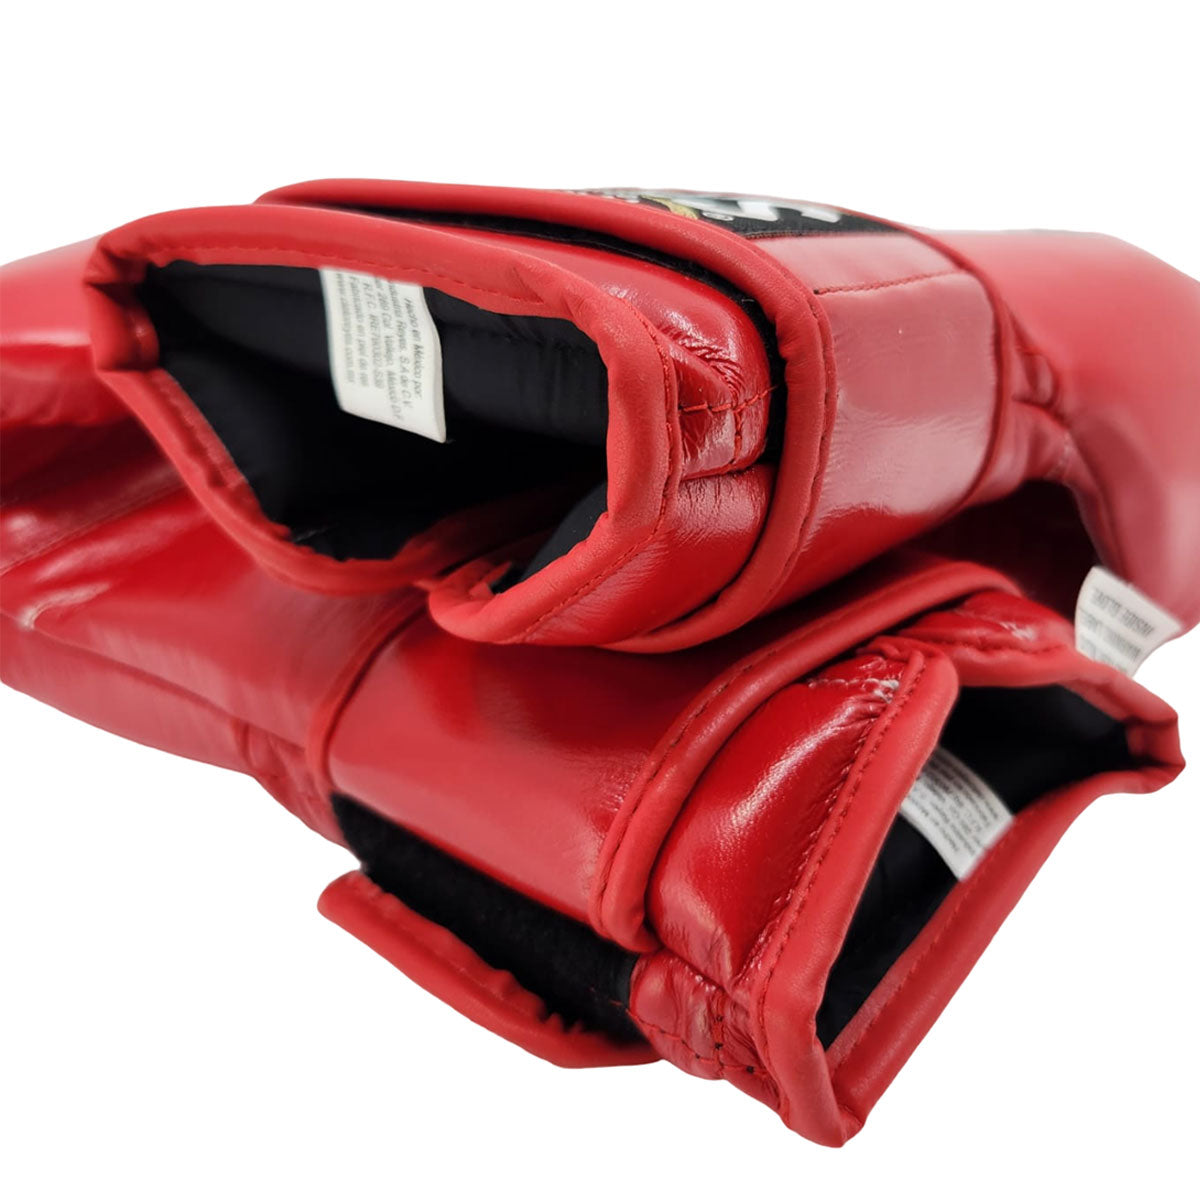 Boxing Gloves Cleto Reyes Hook Loop Closure Red (Free Shipping)